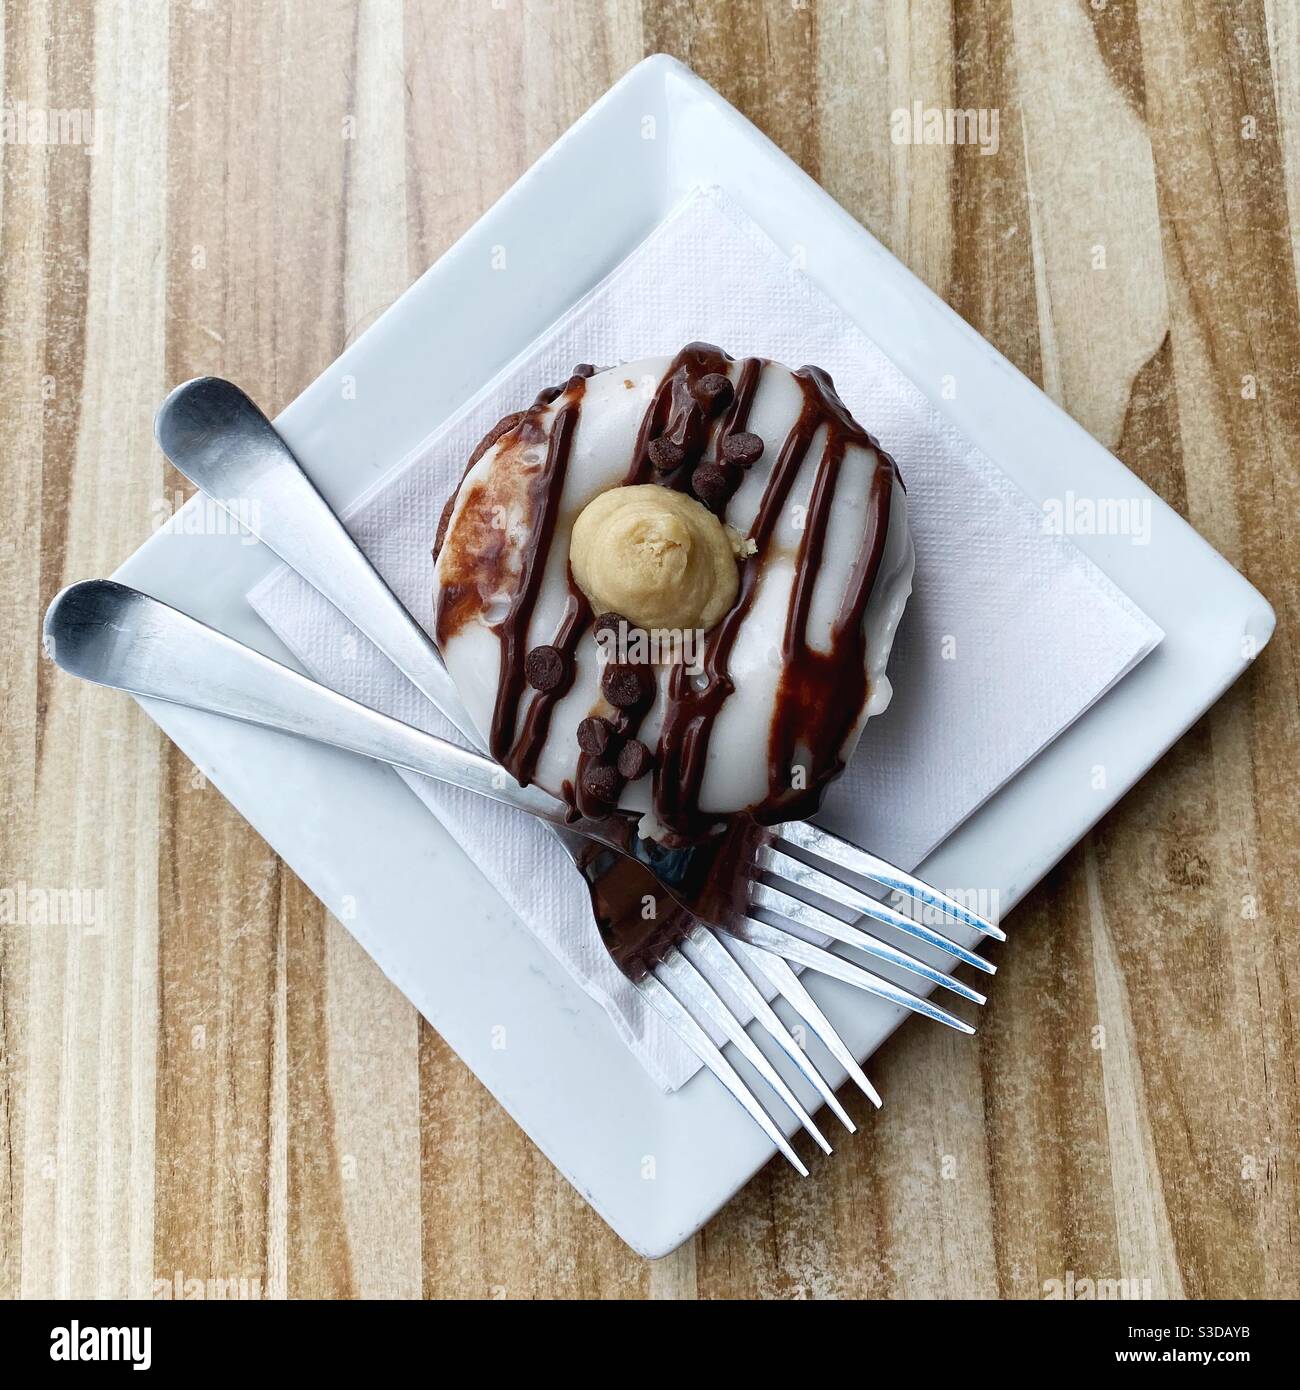 A vegan gluten free donut from Cider Press Cafe in St. Petersburg, Florida. Stock Photo